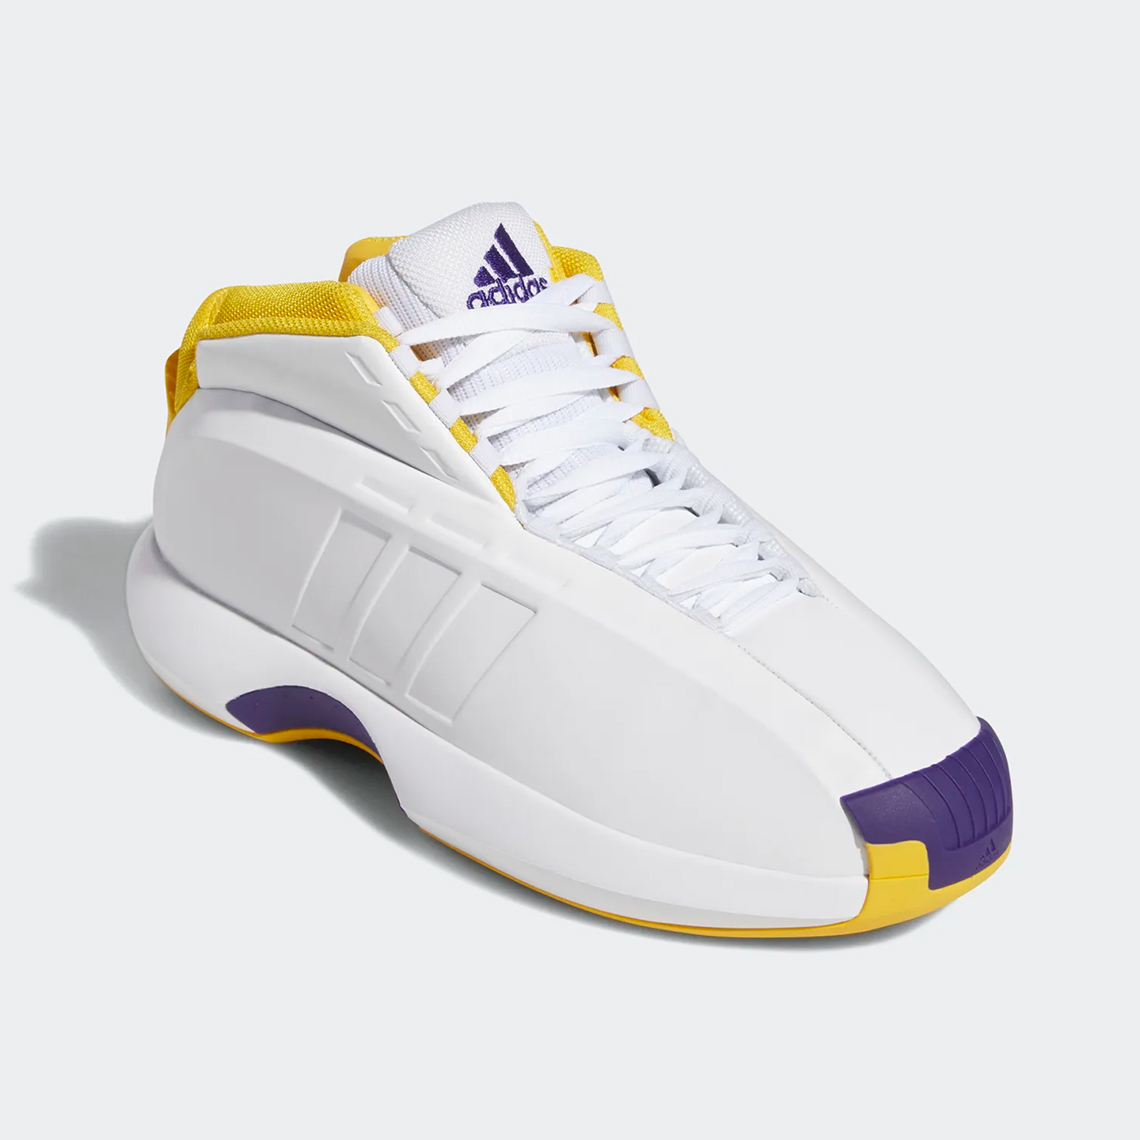 adidas crazy 1 lakers GY8947 7